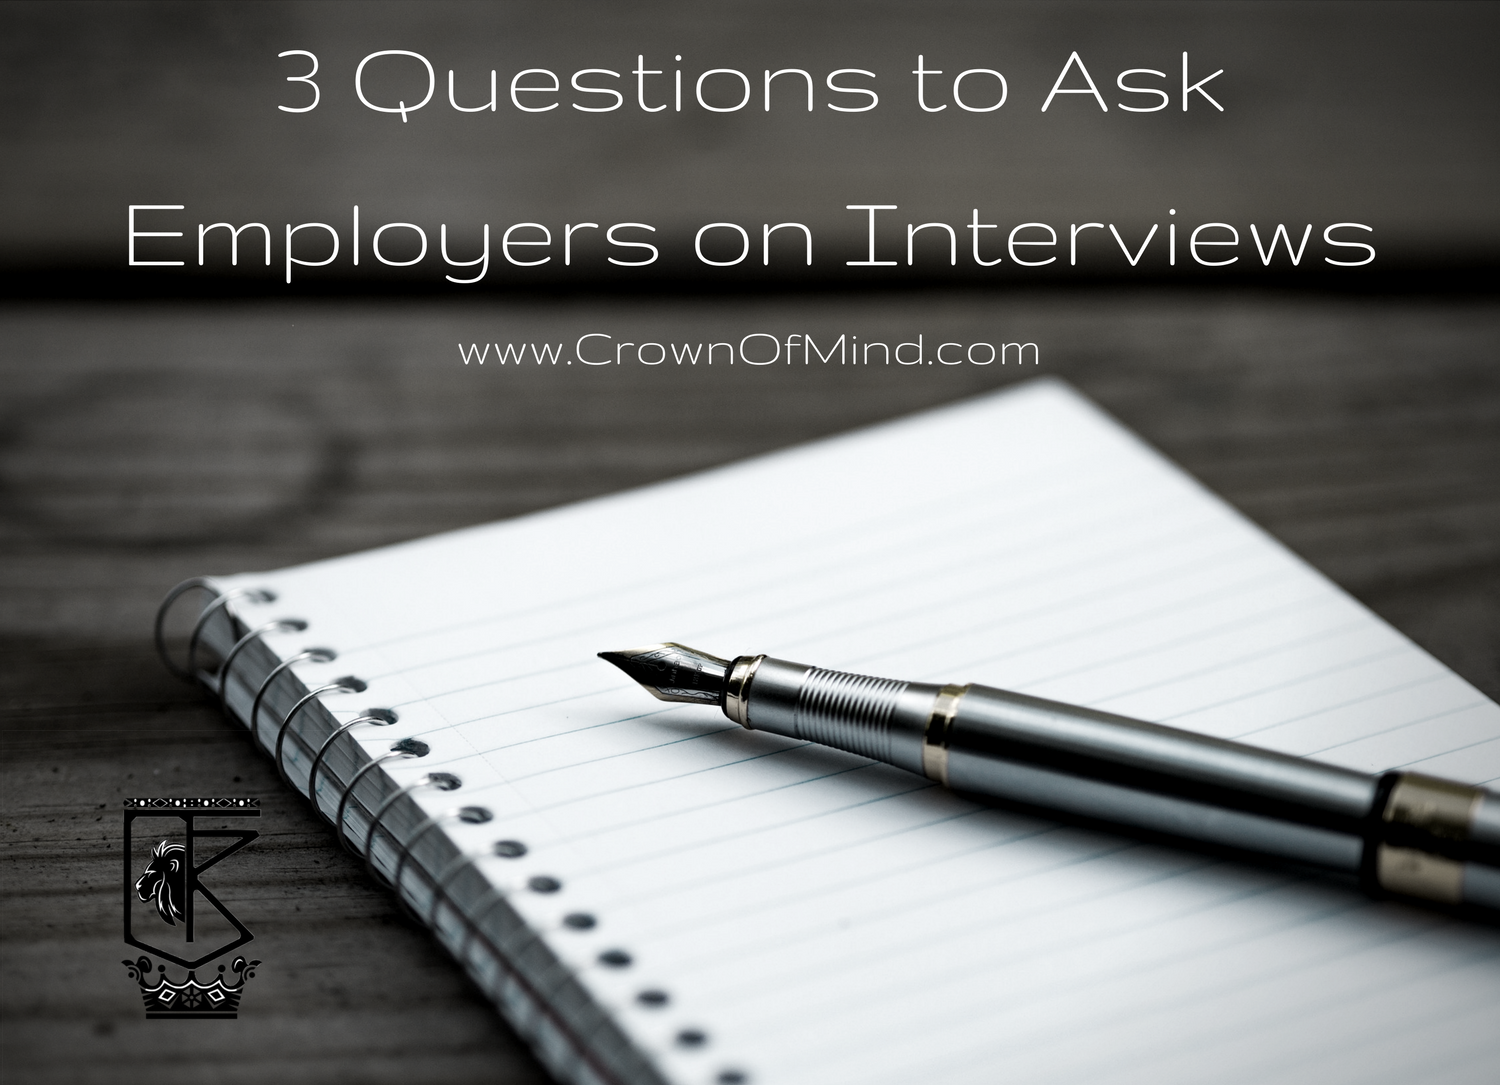 3 Questions to Ask Employers on Interviews